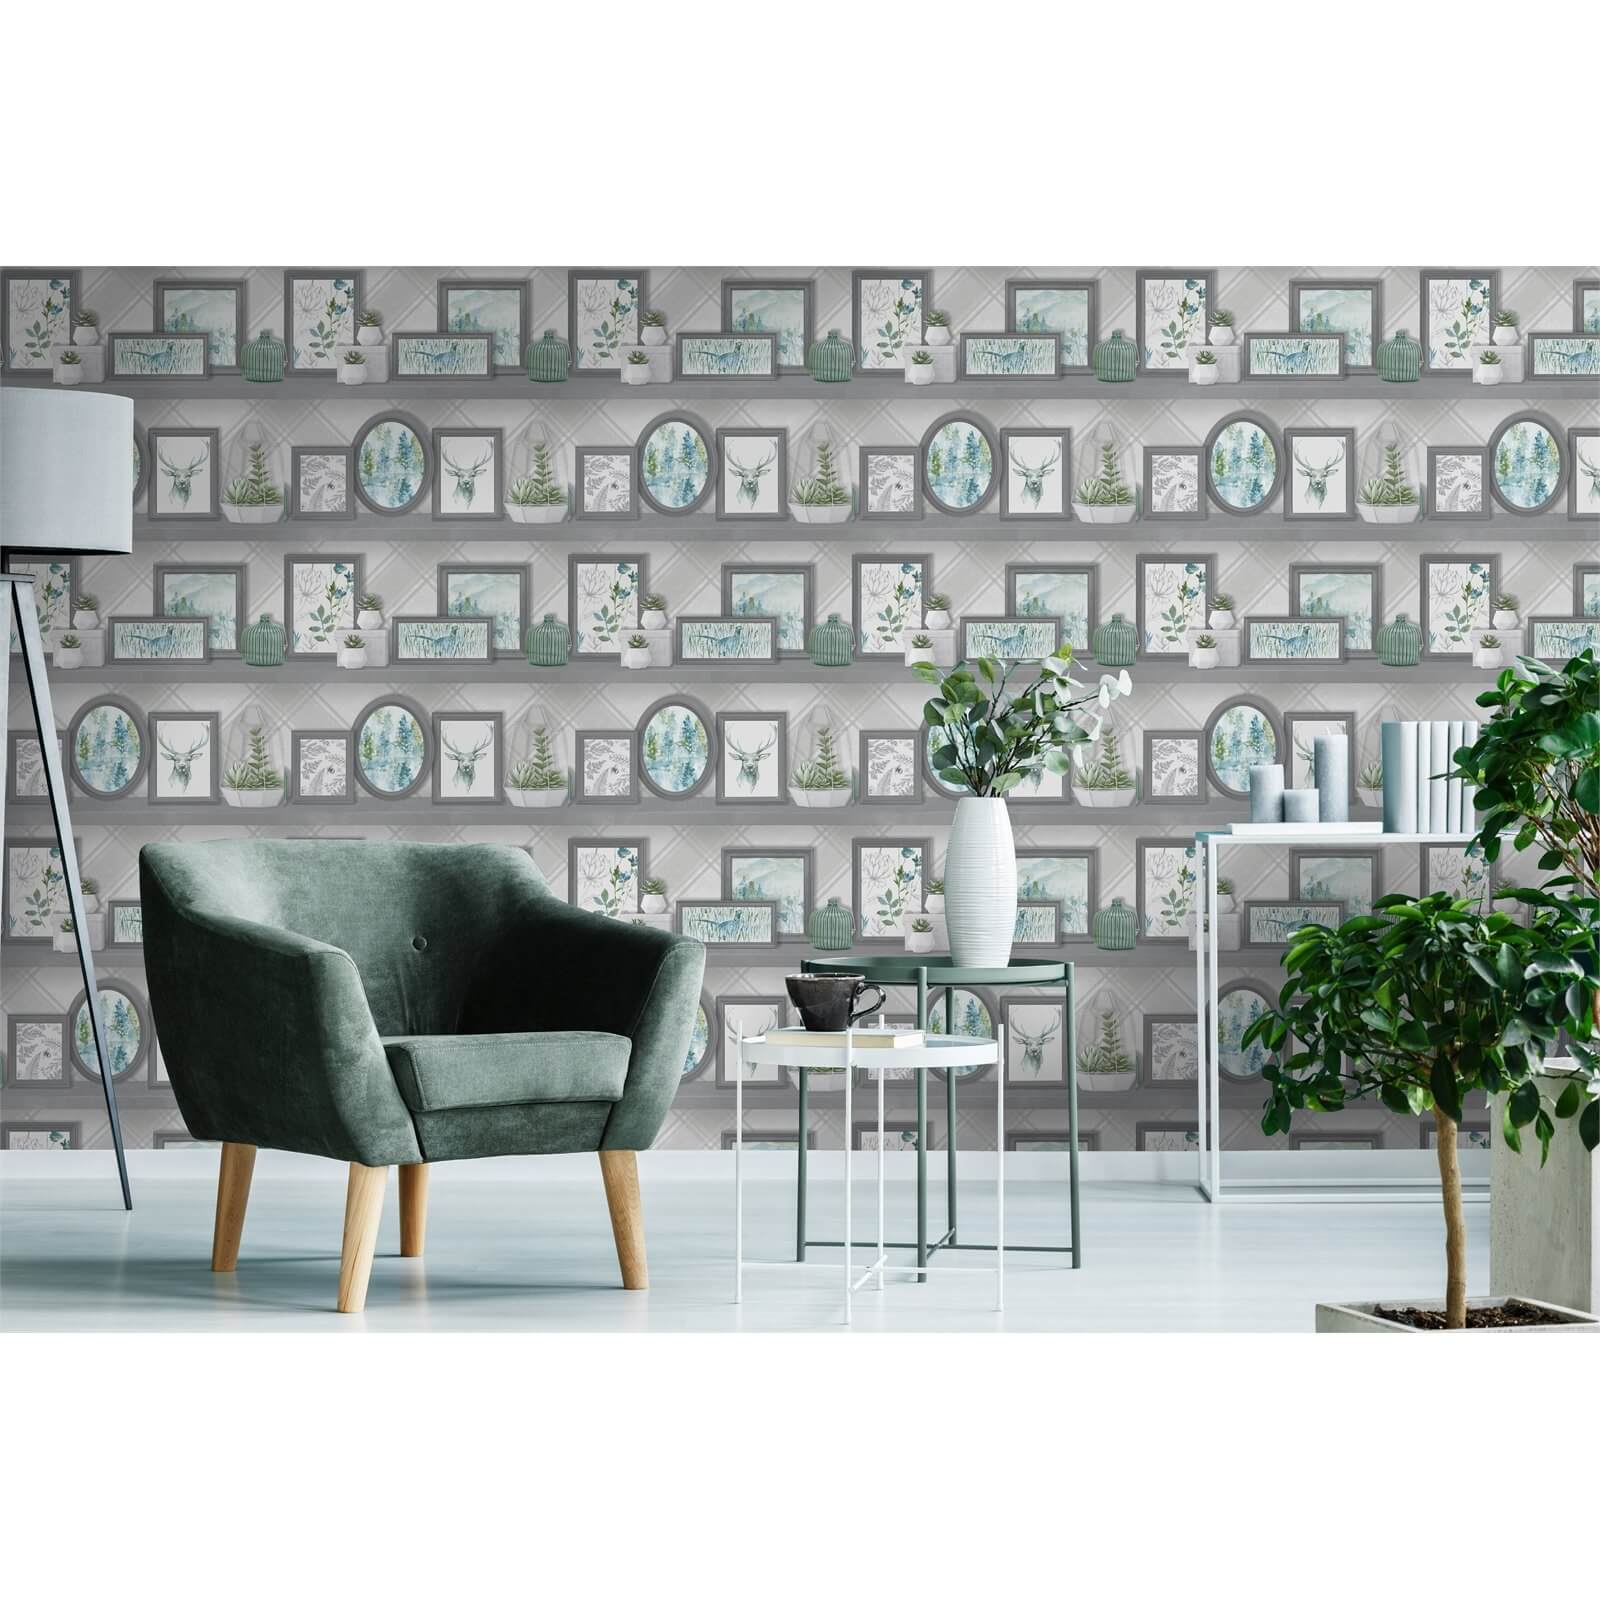 Holden Decor Stag Frames Animal Smooth Grey and Teal Wallpaper